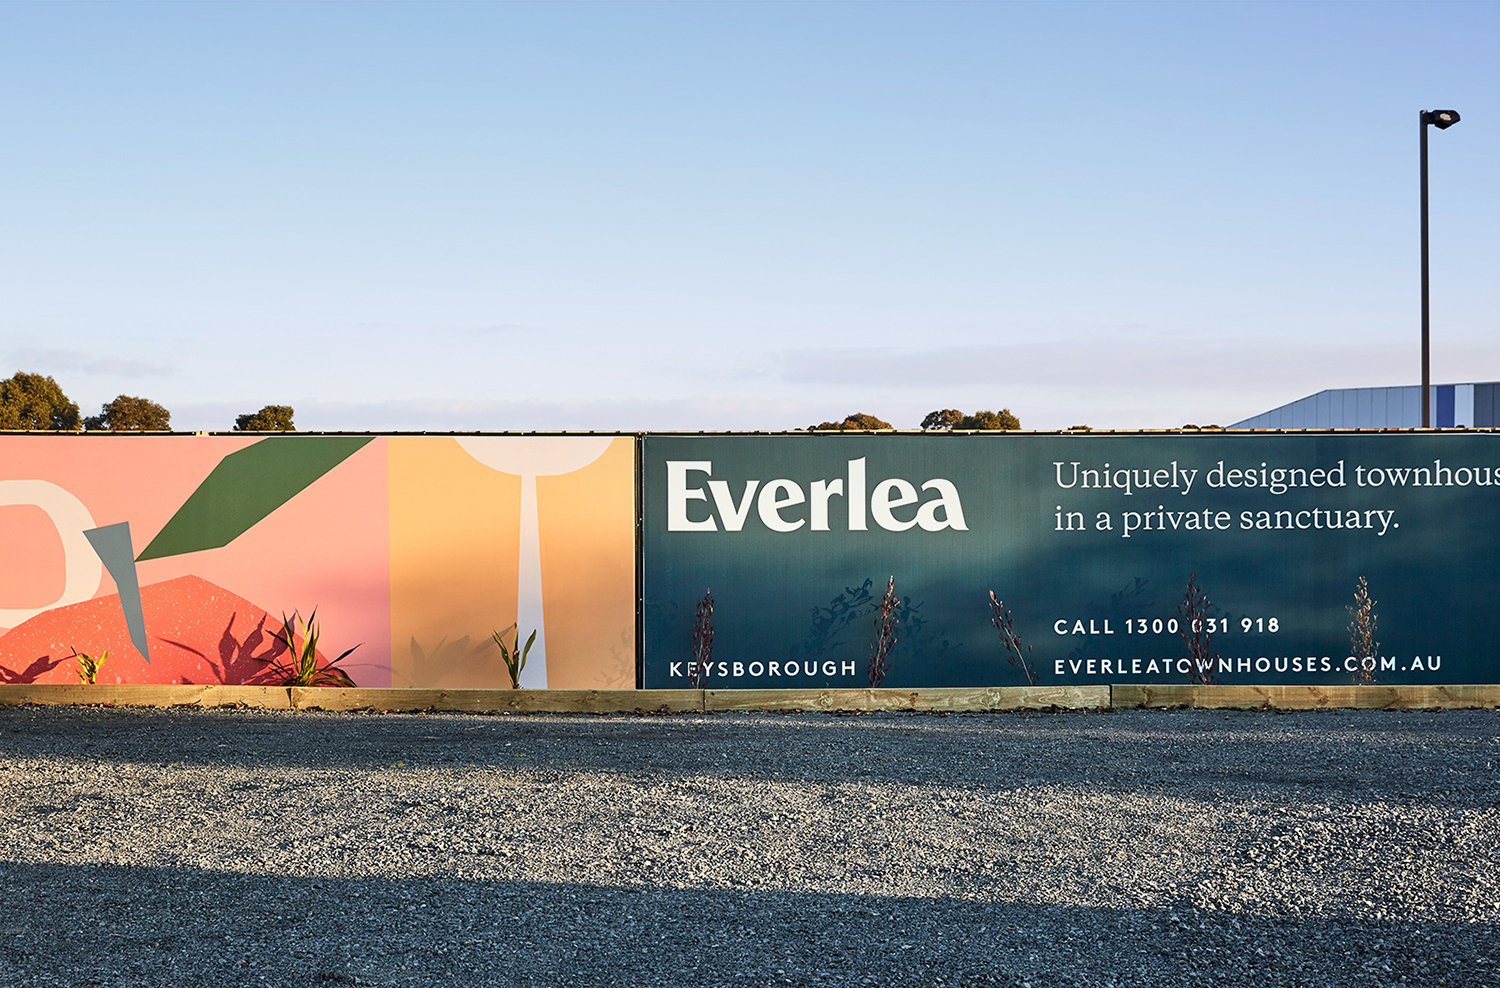 Visual identity and hording design for Everlea by Studio Brave featuring illustration by Tom Abbiss Smith